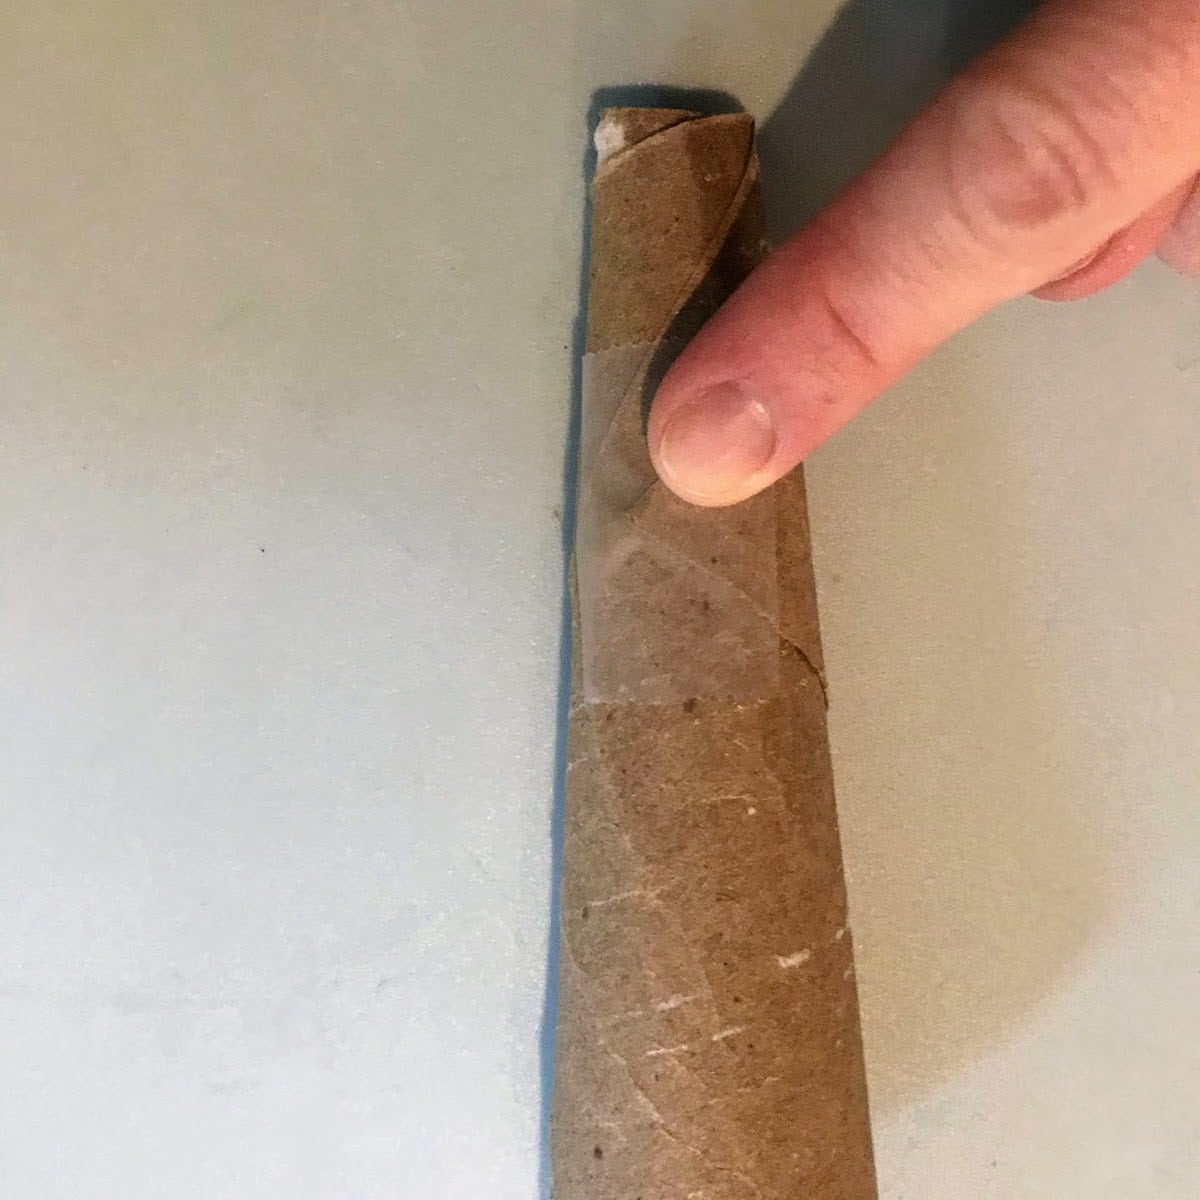 taping sides of toilet paper roll together 